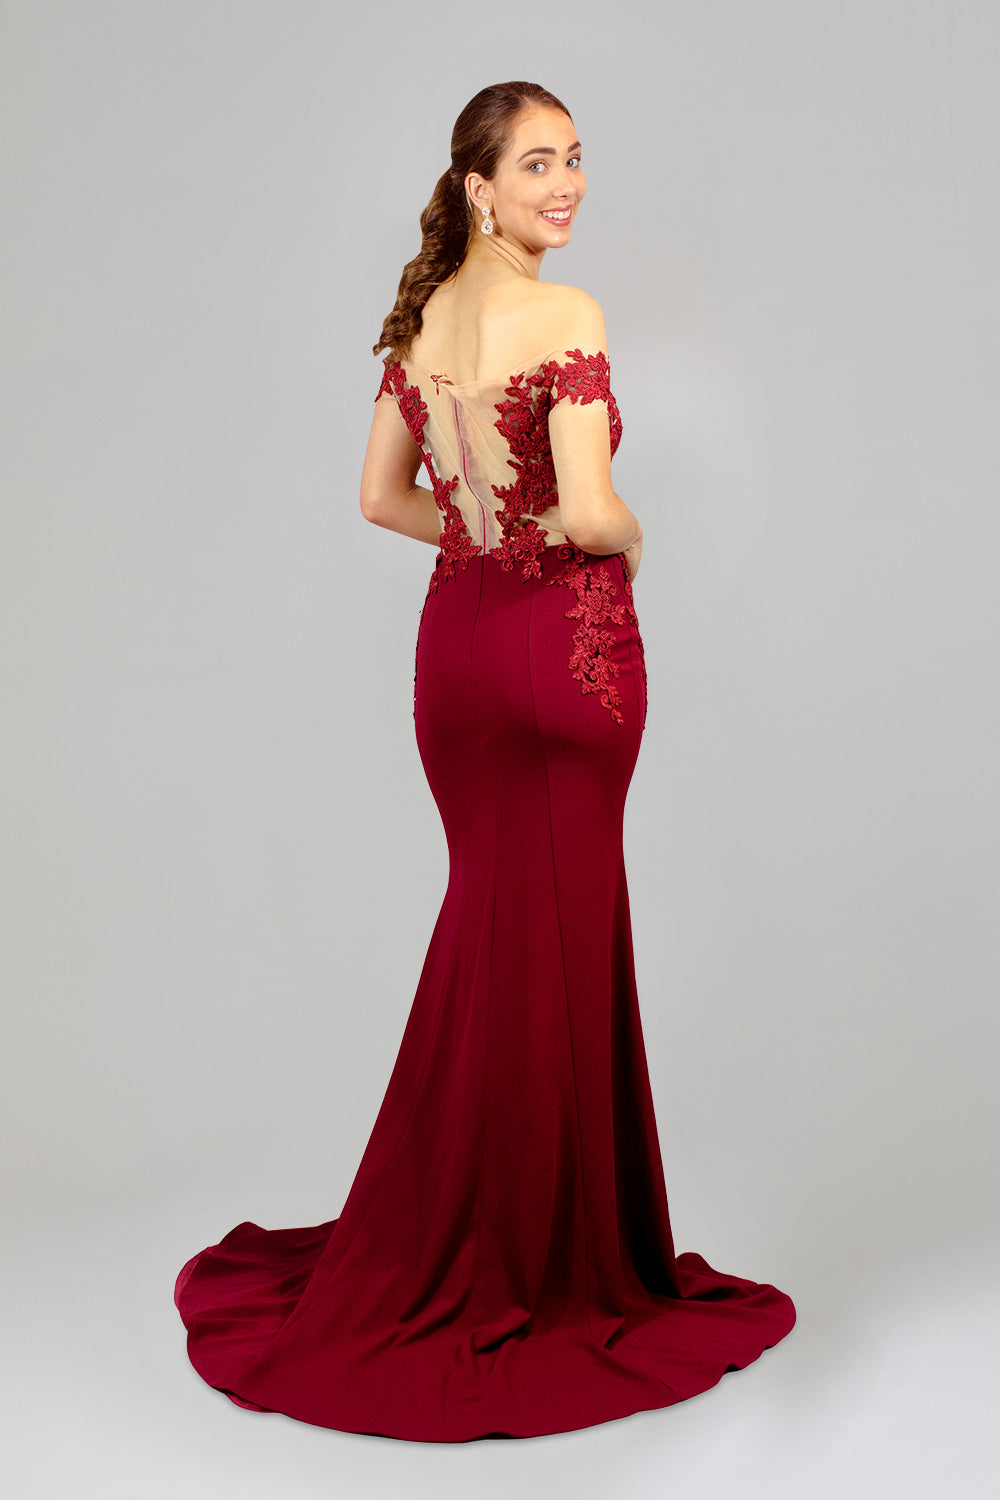 Emerald Formal Gown - Dress Hire Perth - Queen Status Dress Hire